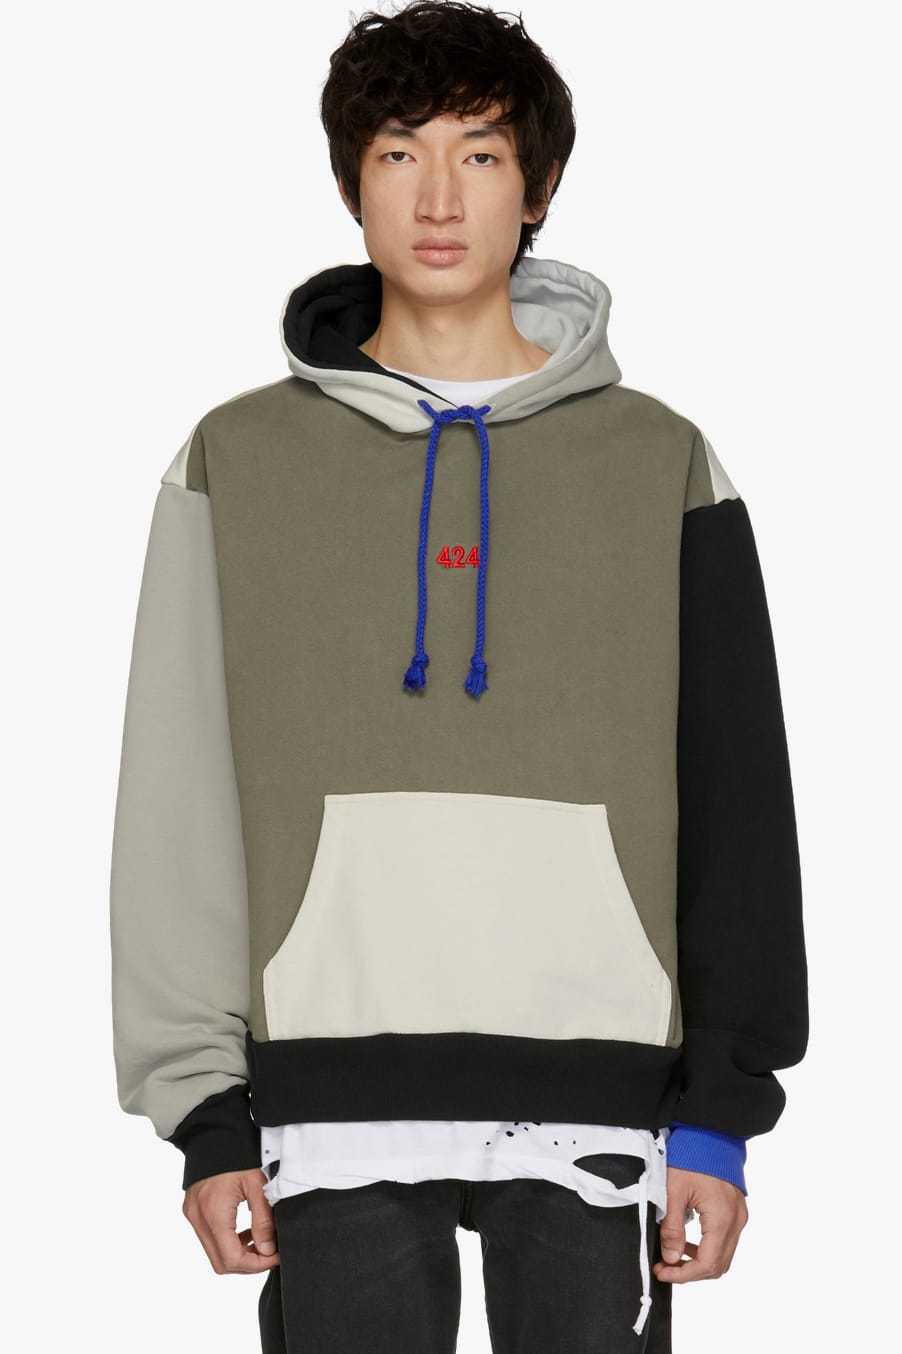 424 Designs a Colorblocked Hoodie for 